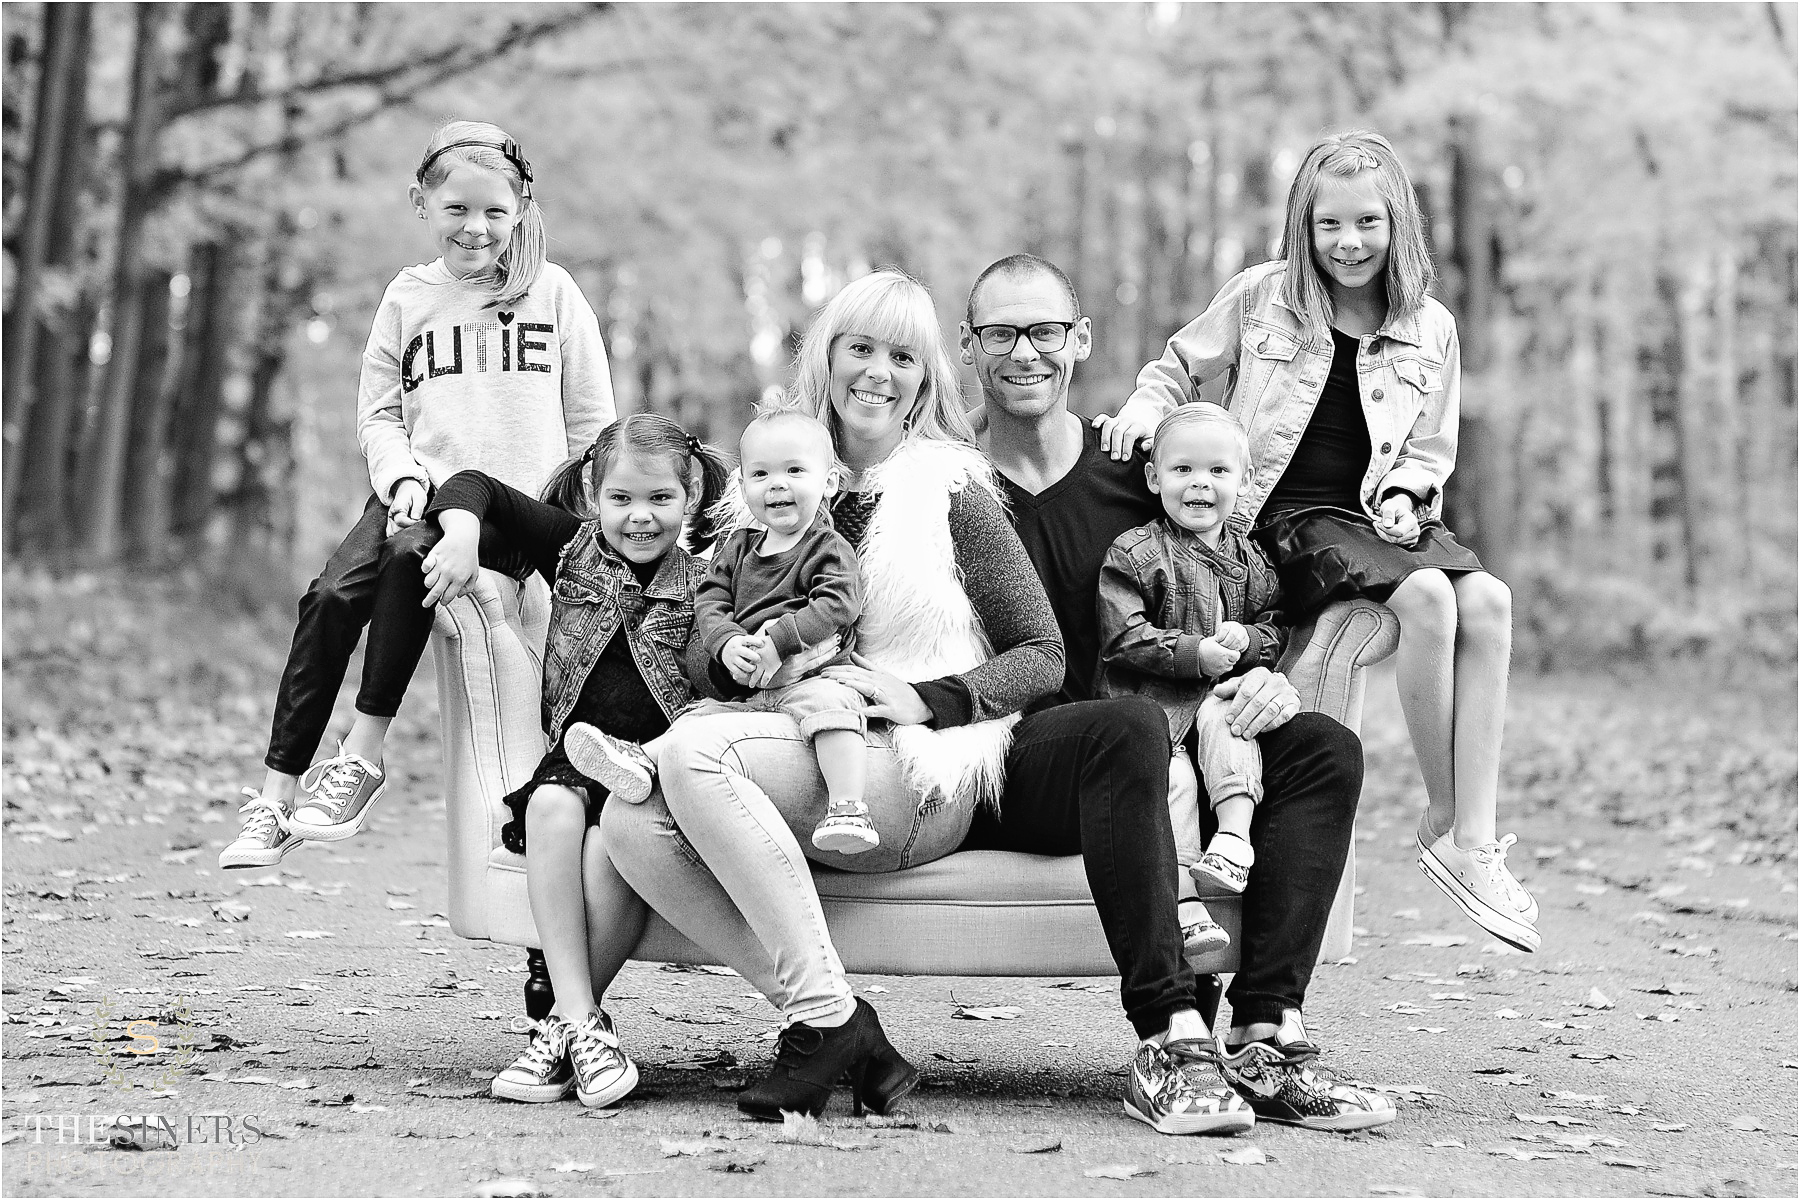 Sumrall Family_Indianapolis Family Photographer_TheSinersPhotography_0003